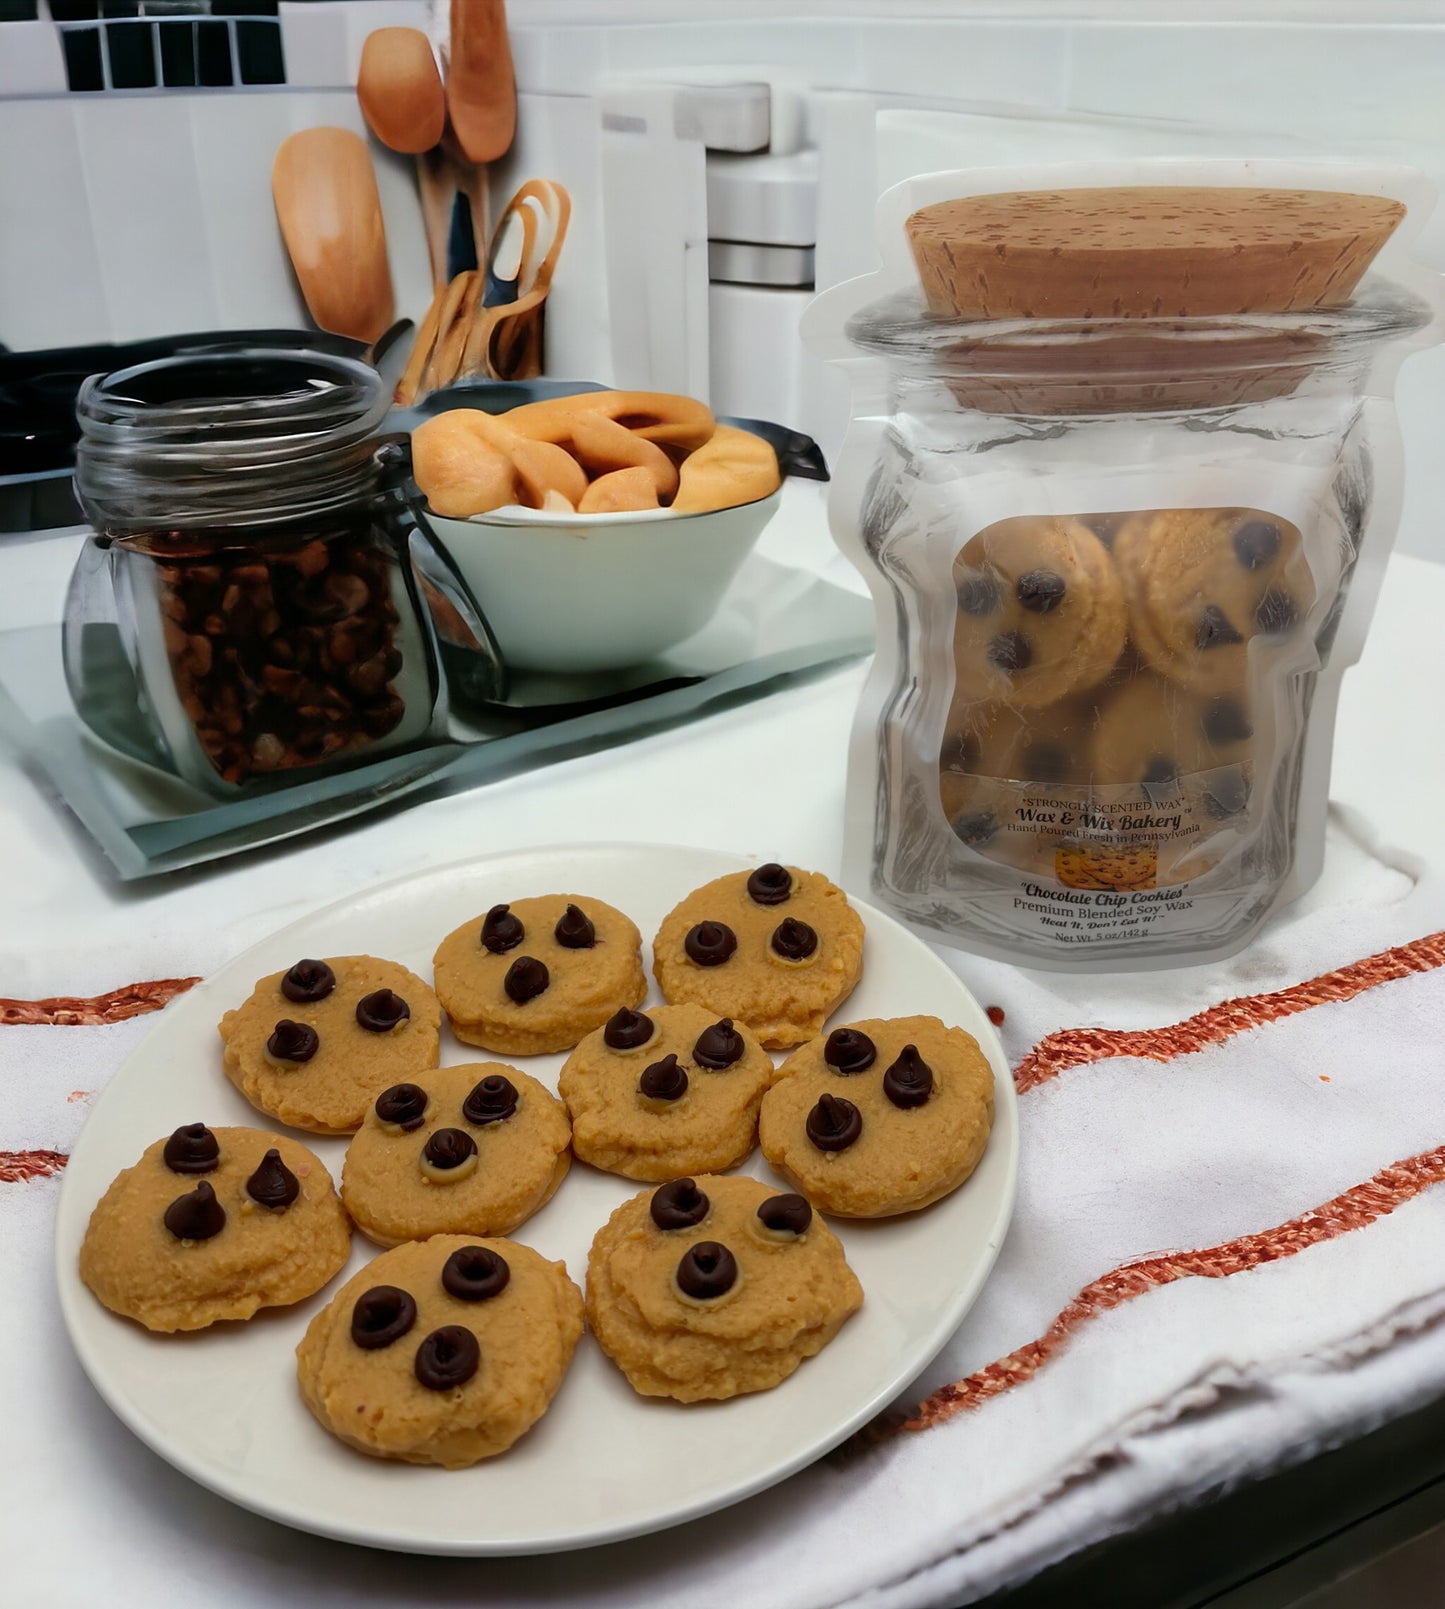 Chocolate Chip Cookies Soy Wax Melts. 5 oz. Soy Wax Melts/9 Cookies/Strongly Scented Wax Melts/Wax Tarts for Wax Warmers.